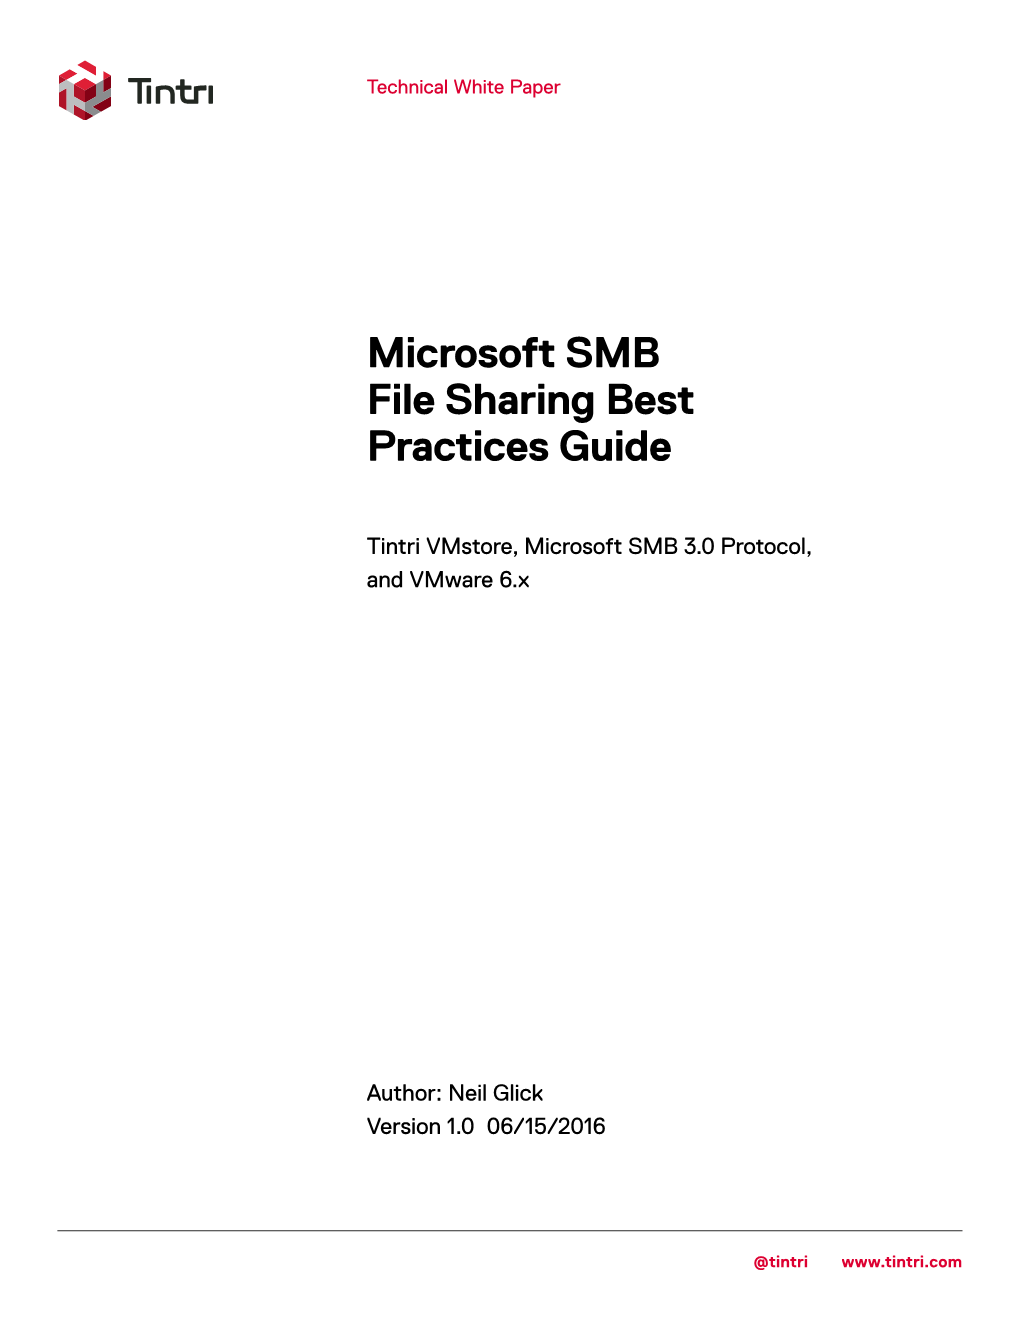 Microsoft SMB File Sharing Best Practices Guide